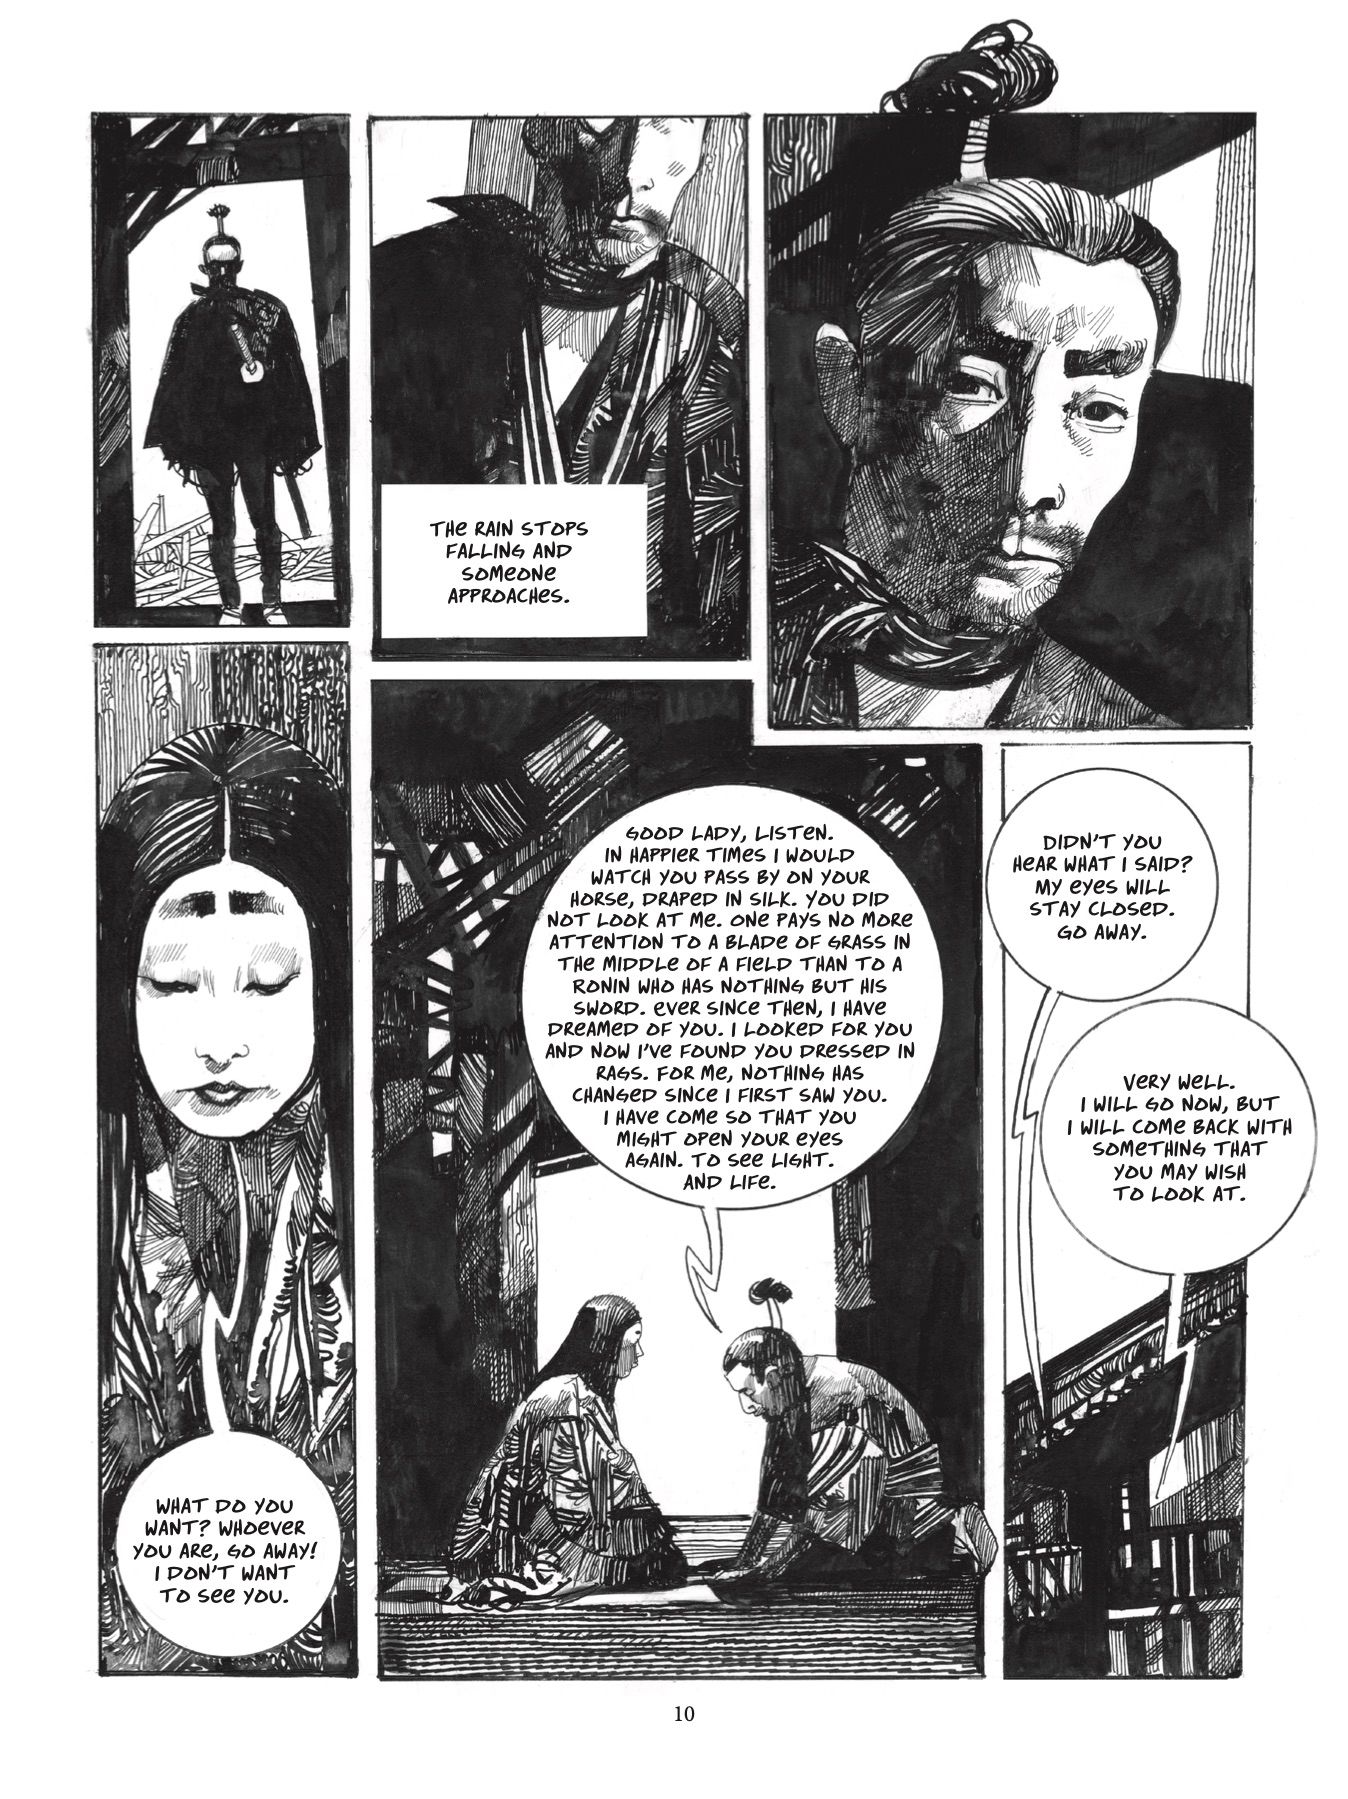 EXCLUSIVE PREVIEW: The Collected Toppi Vol. 6 HC